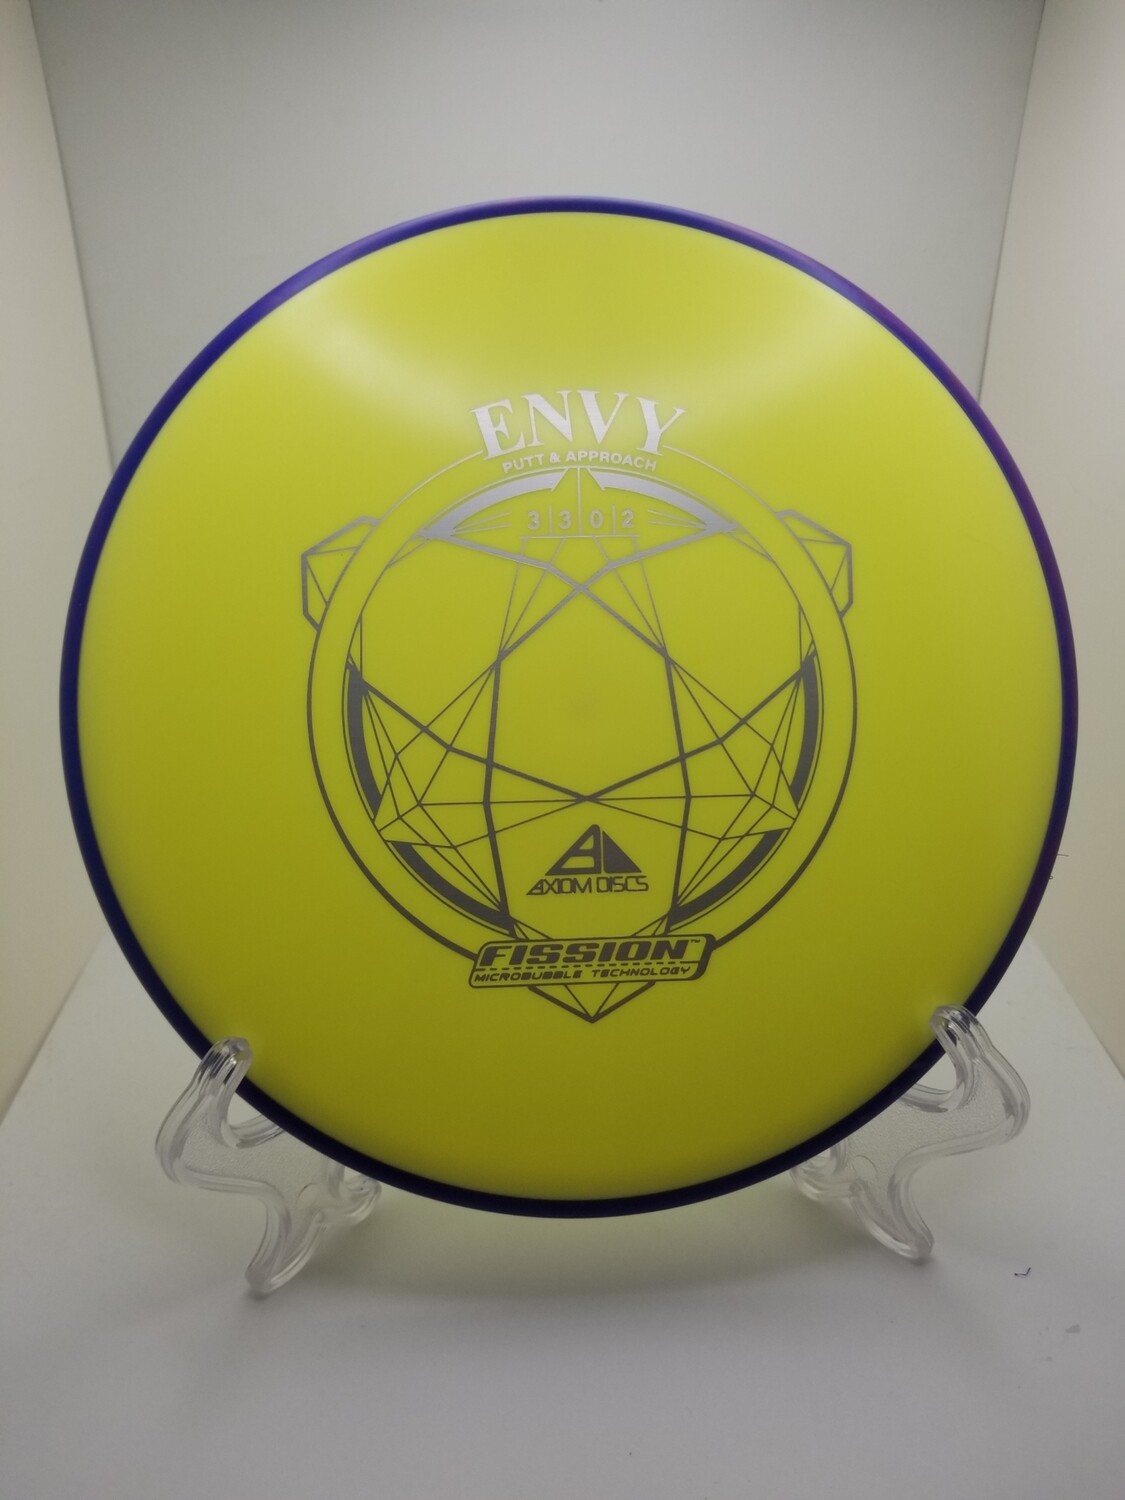 Axiom Discs Envy Neon Yellow with Dark Purple Rim 173g Stamped Fission